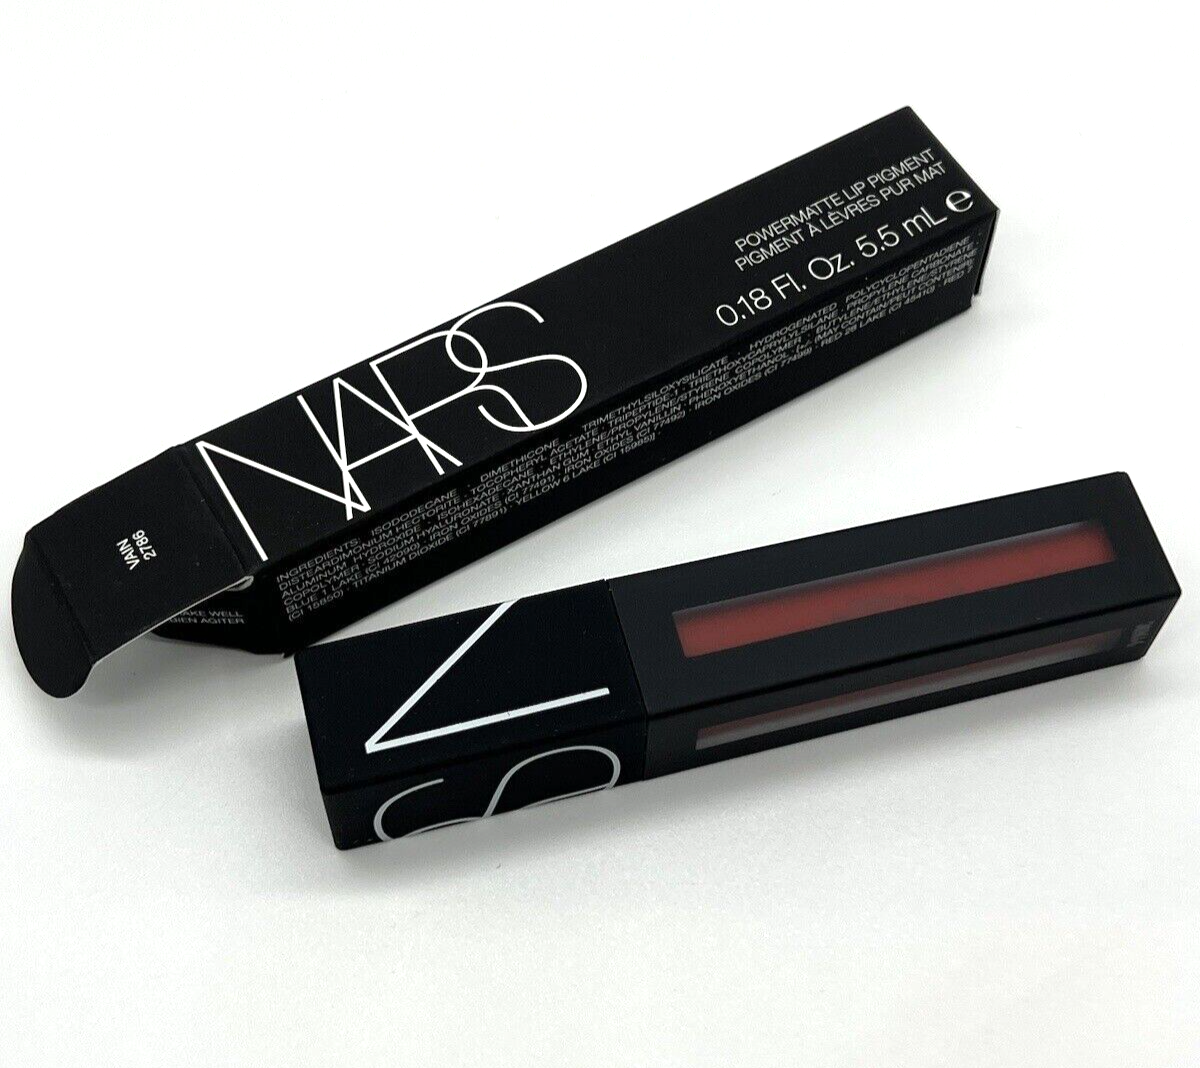 Primary image for NARS Powermatte Lip Pigment - VAIN 2786 (brick red) Full Size Authentic